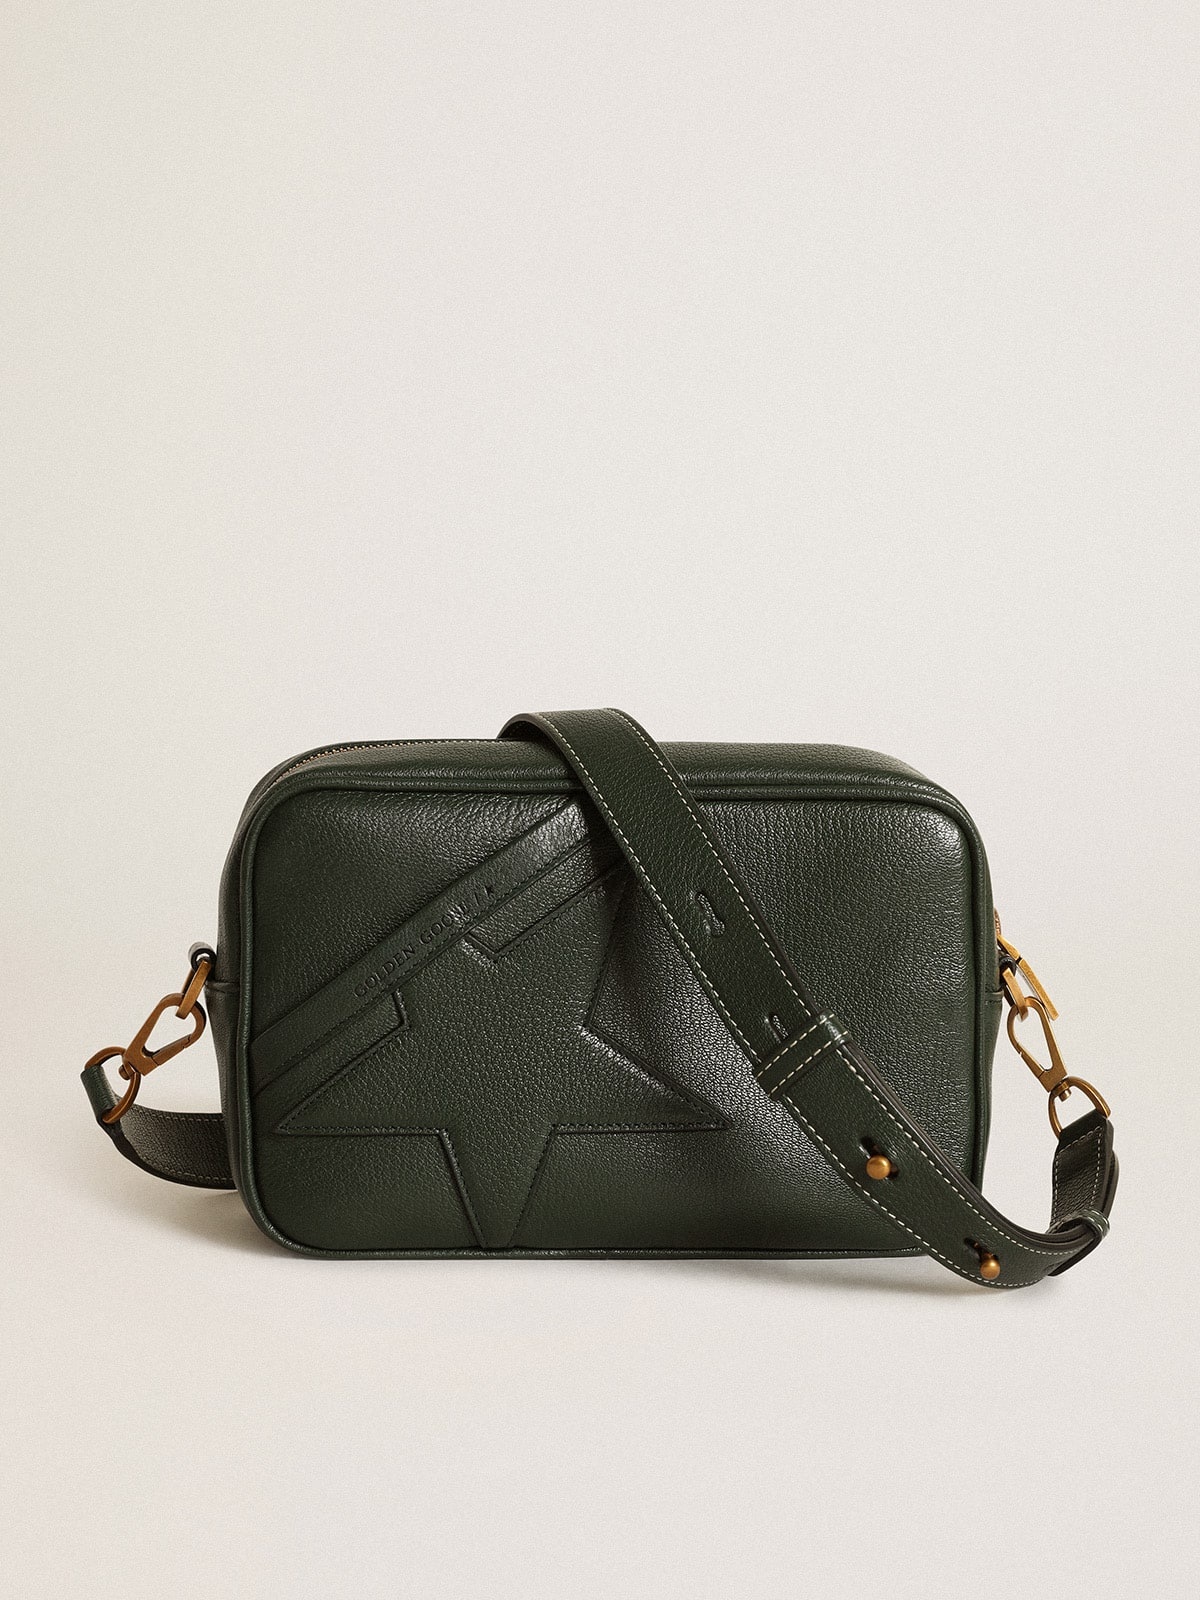 Women's Star Bag in dark green leather with tone-on-tone star - 1